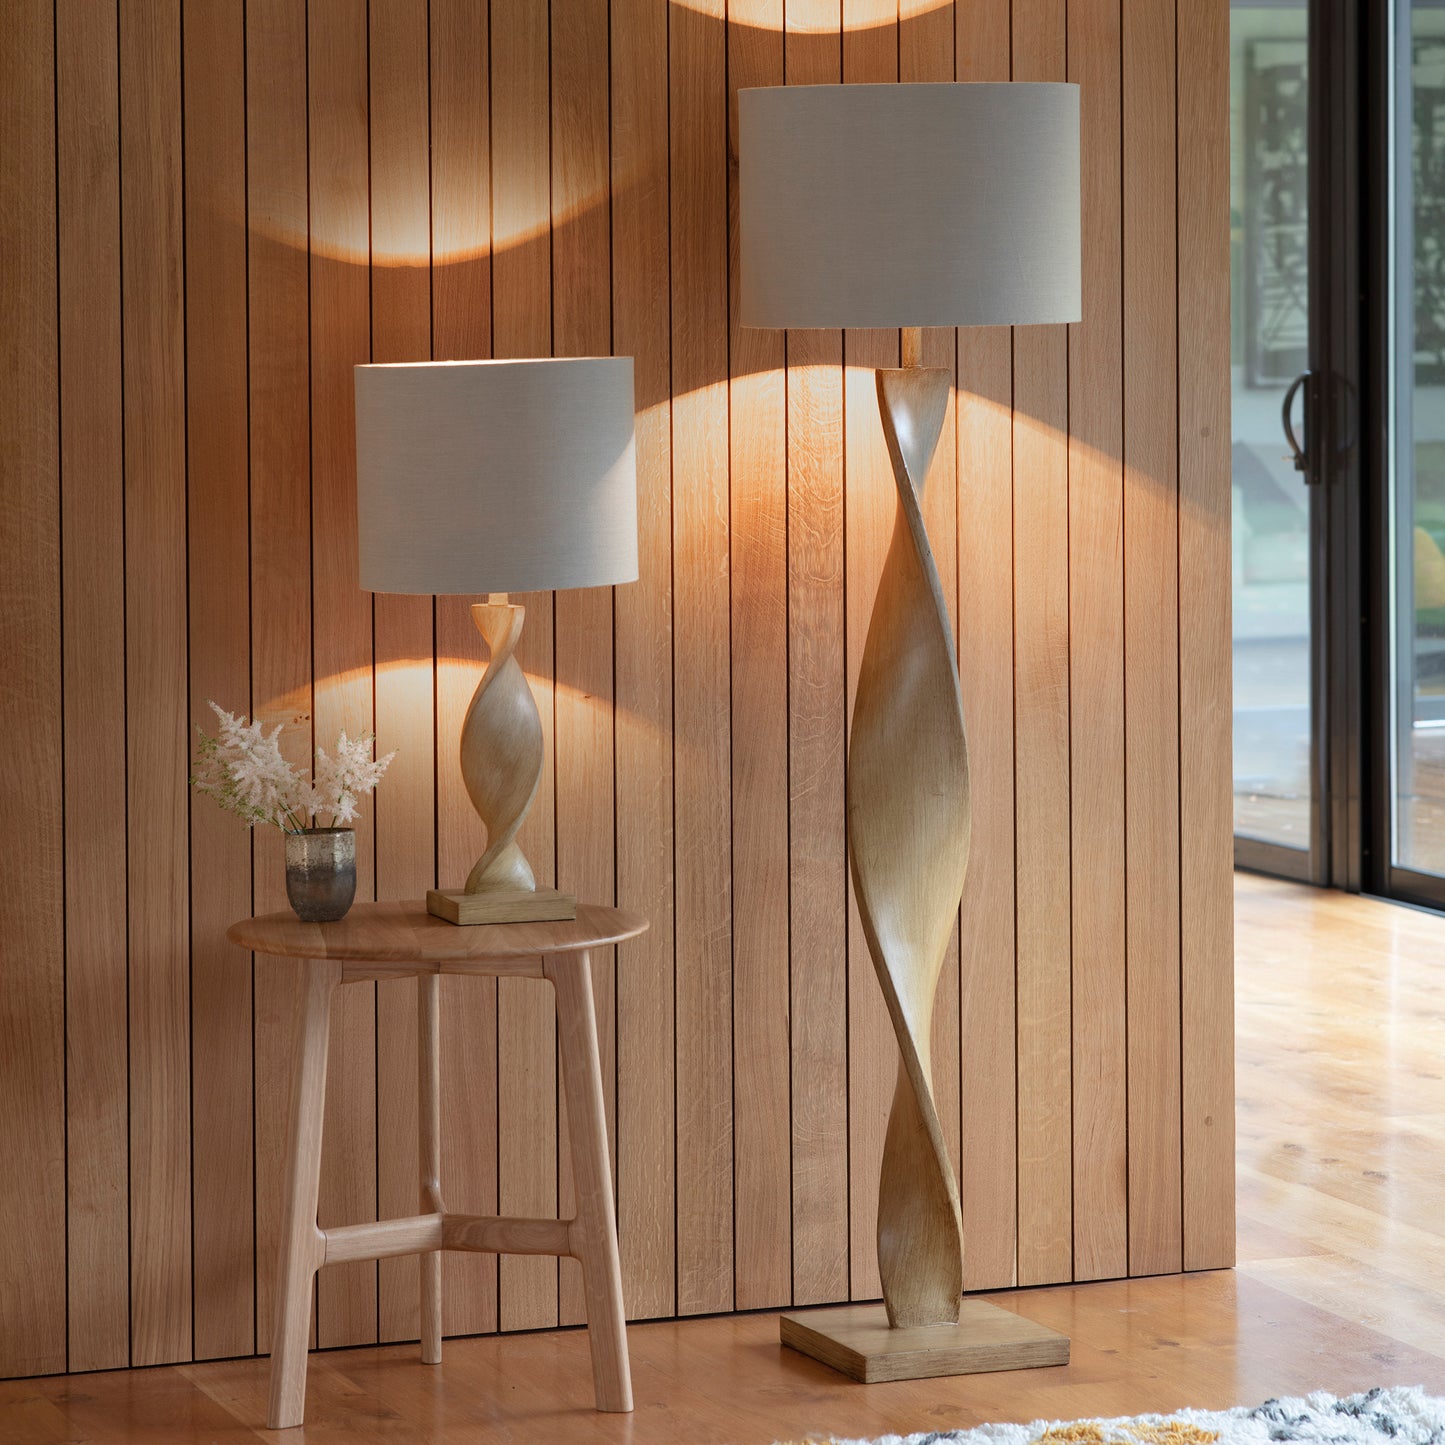 Two Ash Floor Lamps from Kikiathome.co.uk adorning an interior wooden wall.